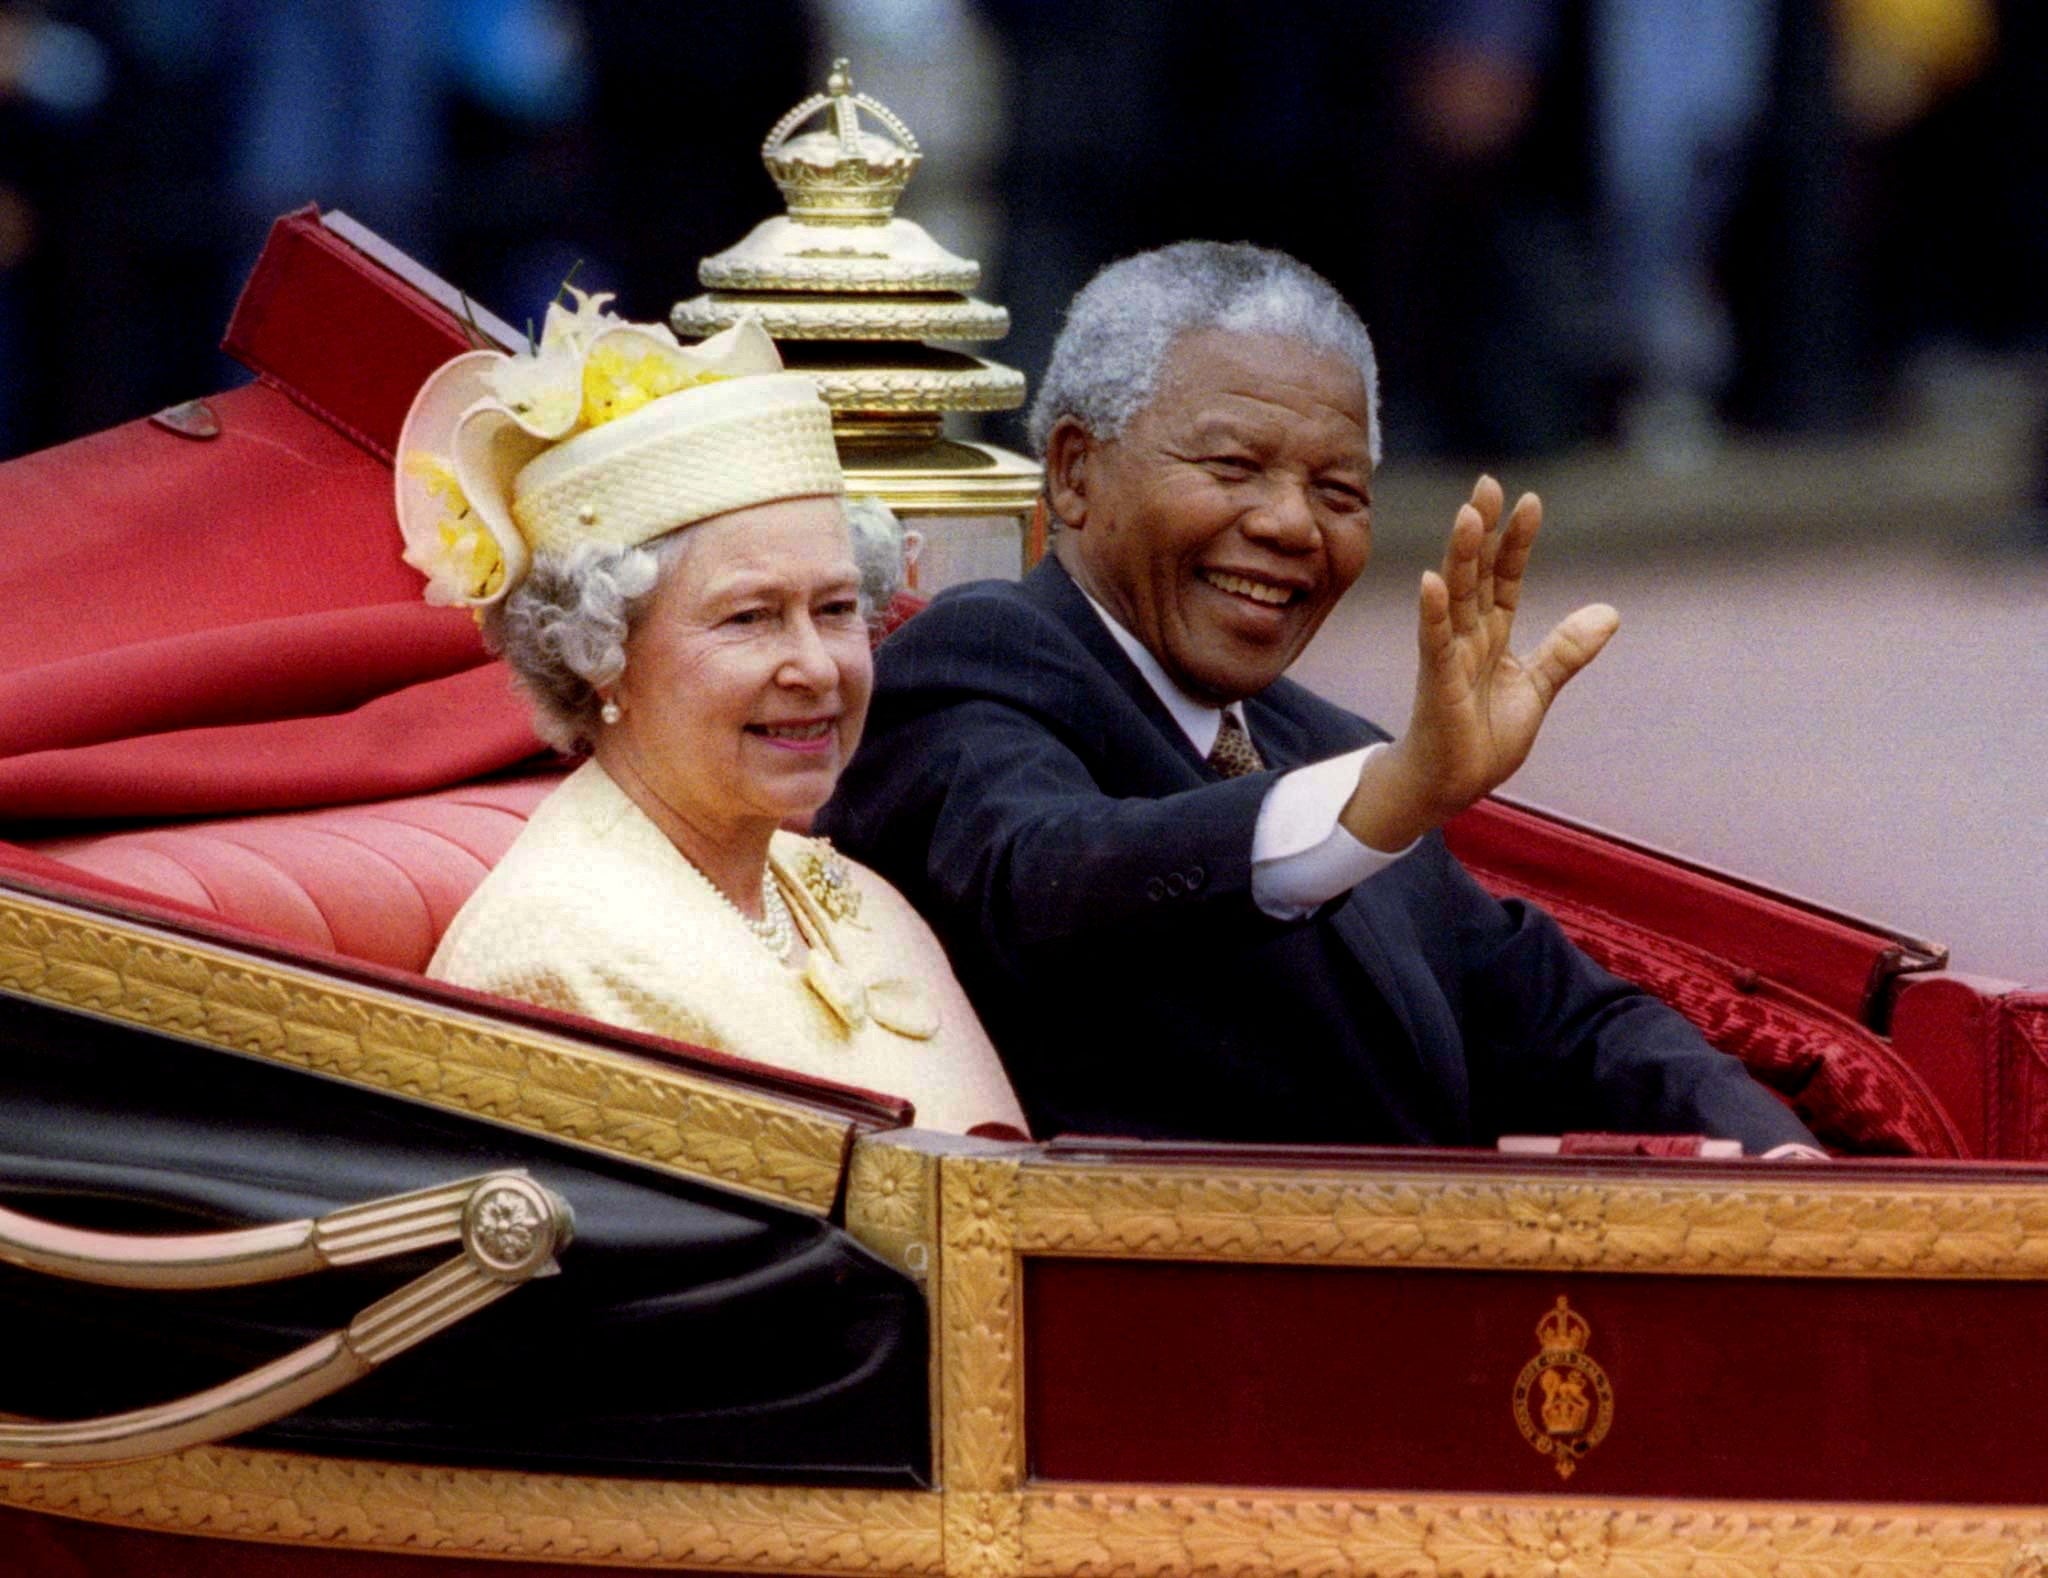 Her Majesty and Nelson Mandela – my grandfather – held each other in such high regard that they were on first-name terms